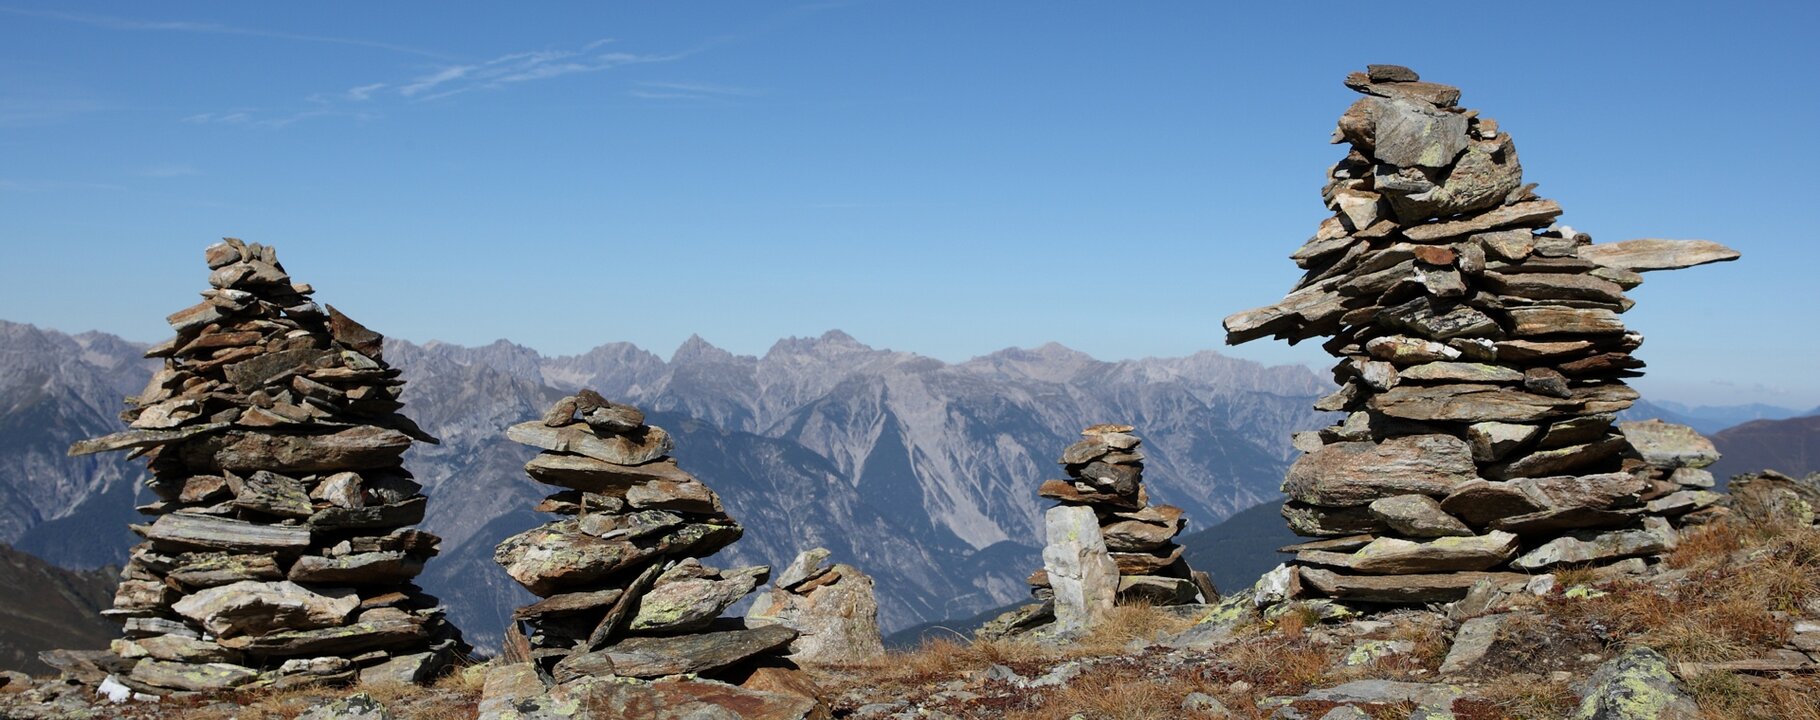 stone towers on hiking paths in Serfaus-Fiss-Ladis in Tyrol Austria | © Andreas Kirschner